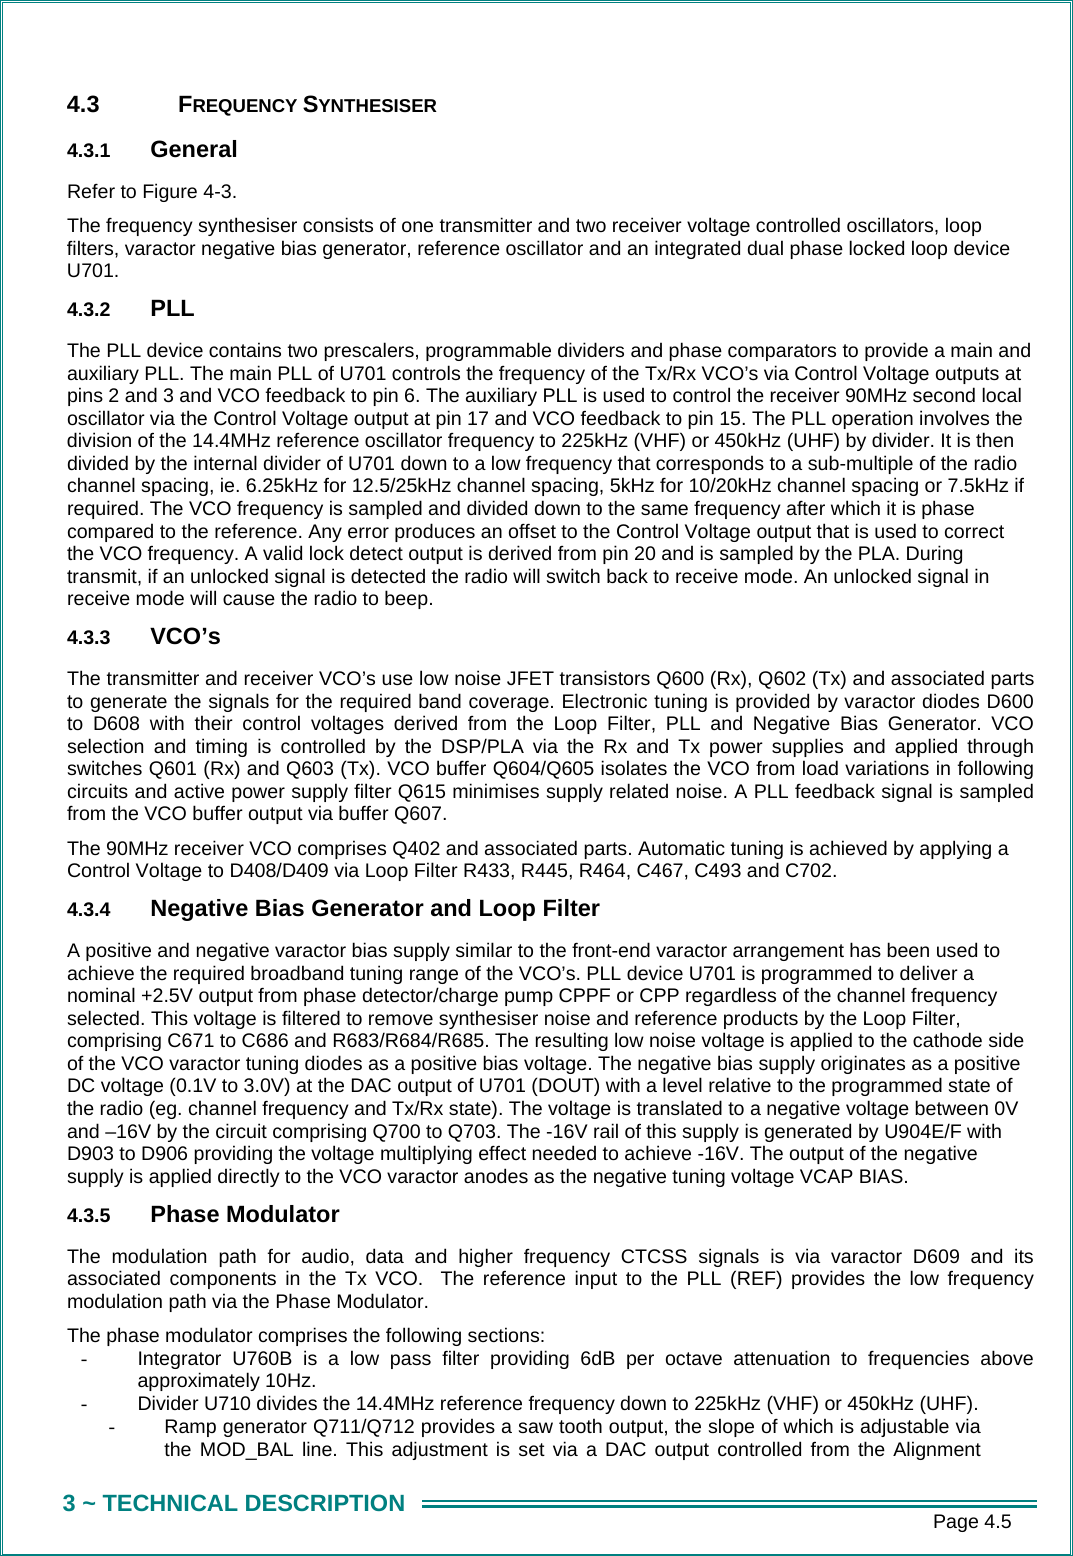      Page 4.5 3 ~ TECHNICAL DESCRIPTION 4.3 FREQUENCY SYNTHESISER 4.3.1  General Refer to Figure 4-3. The frequency synthesiser consists of one transmitter and two receiver voltage controlled oscillators, loop filters, varactor negative bias generator, reference oscillator and an integrated dual phase locked loop device U701. 4.3.2  PLL The PLL device contains two prescalers, programmable dividers and phase comparators to provide a main and auxiliary PLL. The main PLL of U701 controls the frequency of the Tx/Rx VCO’s via Control Voltage outputs at pins 2 and 3 and VCO feedback to pin 6. The auxiliary PLL is used to control the receiver 90MHz second local oscillator via the Control Voltage output at pin 17 and VCO feedback to pin 15. The PLL operation involves the division of the 14.4MHz reference oscillator frequency to 225kHz (VHF) or 450kHz (UHF) by divider. It is then divided by the internal divider of U701 down to a low frequency that corresponds to a sub-multiple of the radio channel spacing, ie. 6.25kHz for 12.5/25kHz channel spacing, 5kHz for 10/20kHz channel spacing or 7.5kHz if required. The VCO frequency is sampled and divided down to the same frequency after which it is phase compared to the reference. Any error produces an offset to the Control Voltage output that is used to correct the VCO frequency. A valid lock detect output is derived from pin 20 and is sampled by the PLA. During transmit, if an unlocked signal is detected the radio will switch back to receive mode. An unlocked signal in receive mode will cause the radio to beep. 4.3.3  VCO’s The transmitter and receiver VCO’s use low noise JFET transistors Q600 (Rx), Q602 (Tx) and associated parts to generate the signals for the required band coverage. Electronic tuning is provided by varactor diodes D600 to D608 with their control voltages derived from the Loop Filter, PLL and Negative Bias Generator. VCO selection and timing is controlled by the DSP/PLA via the Rx and Tx power supplies and applied through switches Q601 (Rx) and Q603 (Tx). VCO buffer Q604/Q605 isolates the VCO from load variations in following circuits and active power supply filter Q615 minimises supply related noise. A PLL feedback signal is sampled from the VCO buffer output via buffer Q607. The 90MHz receiver VCO comprises Q402 and associated parts. Automatic tuning is achieved by applying a Control Voltage to D408/D409 via Loop Filter R433, R445, R464, C467, C493 and C702. 4.3.4  Negative Bias Generator and Loop Filter A positive and negative varactor bias supply similar to the front-end varactor arrangement has been used to achieve the required broadband tuning range of the VCO’s. PLL device U701 is programmed to deliver a nominal +2.5V output from phase detector/charge pump CPPF or CPP regardless of the channel frequency selected. This voltage is filtered to remove synthesiser noise and reference products by the Loop Filter, comprising C671 to C686 and R683/R684/R685. The resulting low noise voltage is applied to the cathode side of the VCO varactor tuning diodes as a positive bias voltage. The negative bias supply originates as a positive DC voltage (0.1V to 3.0V) at the DAC output of U701 (DOUT) with a level relative to the programmed state of the radio (eg. channel frequency and Tx/Rx state). The voltage is translated to a negative voltage between 0V and –16V by the circuit comprising Q700 to Q703. The -16V rail of this supply is generated by U904E/F with D903 to D906 providing the voltage multiplying effect needed to achieve -16V. The output of the negative supply is applied directly to the VCO varactor anodes as the negative tuning voltage VCAP BIAS.   4.3.5  Phase Modulator The modulation path for audio, data and higher frequency CTCSS signals is via varactor D609 and its associated components in the Tx VCO.  The reference input to the PLL (REF) provides the low frequency modulation path via the Phase Modulator.  The phase modulator comprises the following sections: -  Integrator U760B is a low pass filter providing 6dB per octave attenuation to frequencies above approximately 10Hz. -  Divider U710 divides the 14.4MHz reference frequency down to 225kHz (VHF) or 450kHz (UHF). -  Ramp generator Q711/Q712 provides a saw tooth output, the slope of which is adjustable via the MOD_BAL line. This adjustment is set via a DAC output controlled from the Alignment 